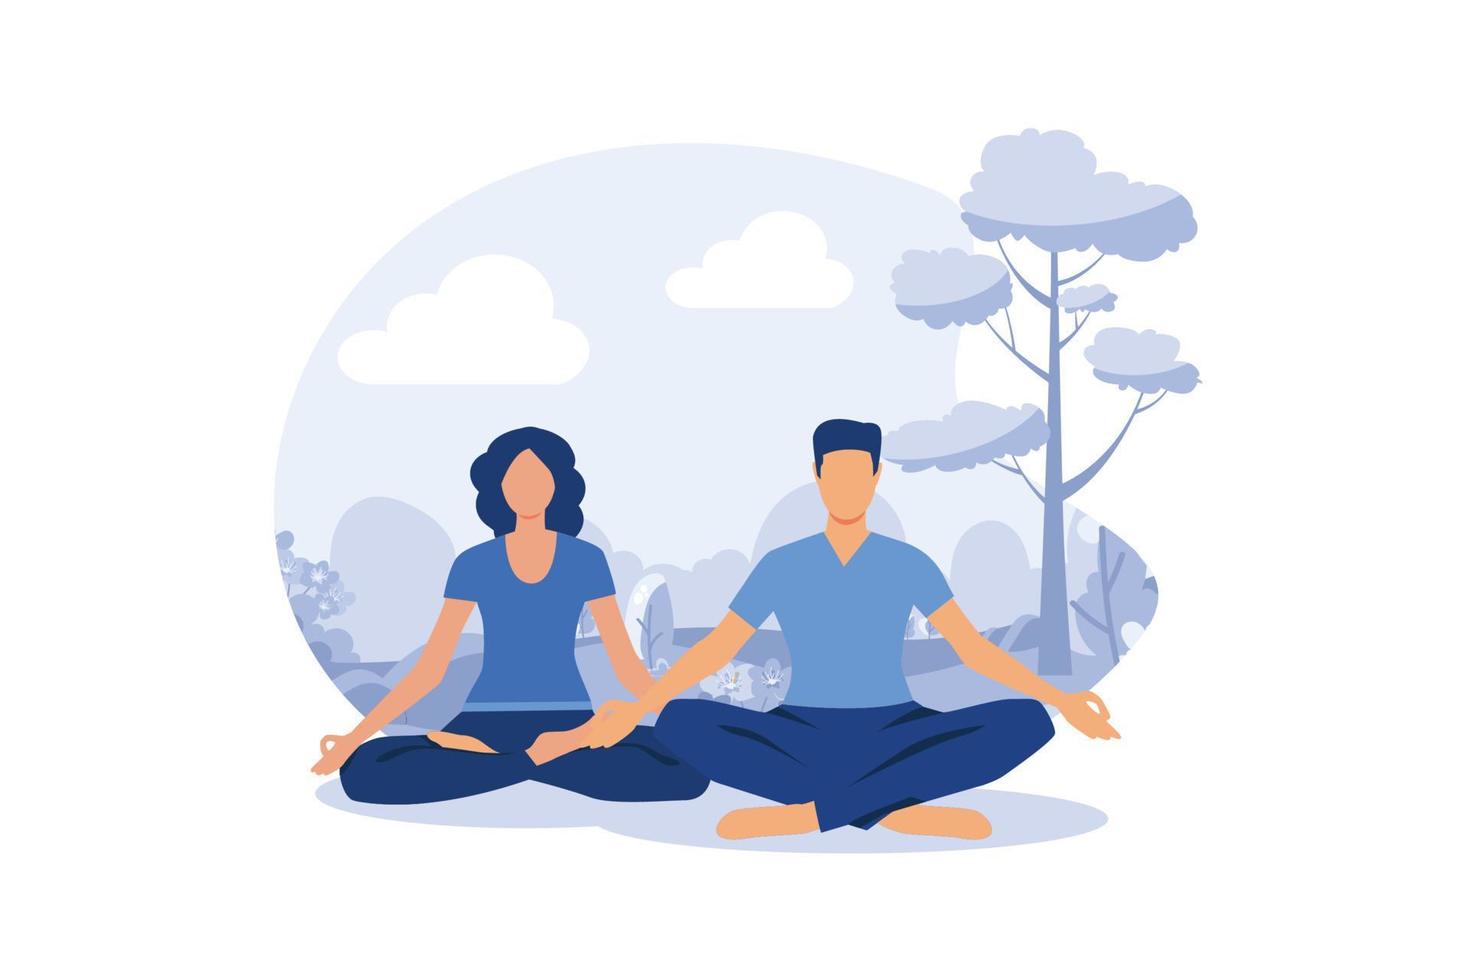 yoga health benefits of the body, mind and emotions, a pregnant woman with her partner in a yoga pose meditate. flat design modern illustration vector